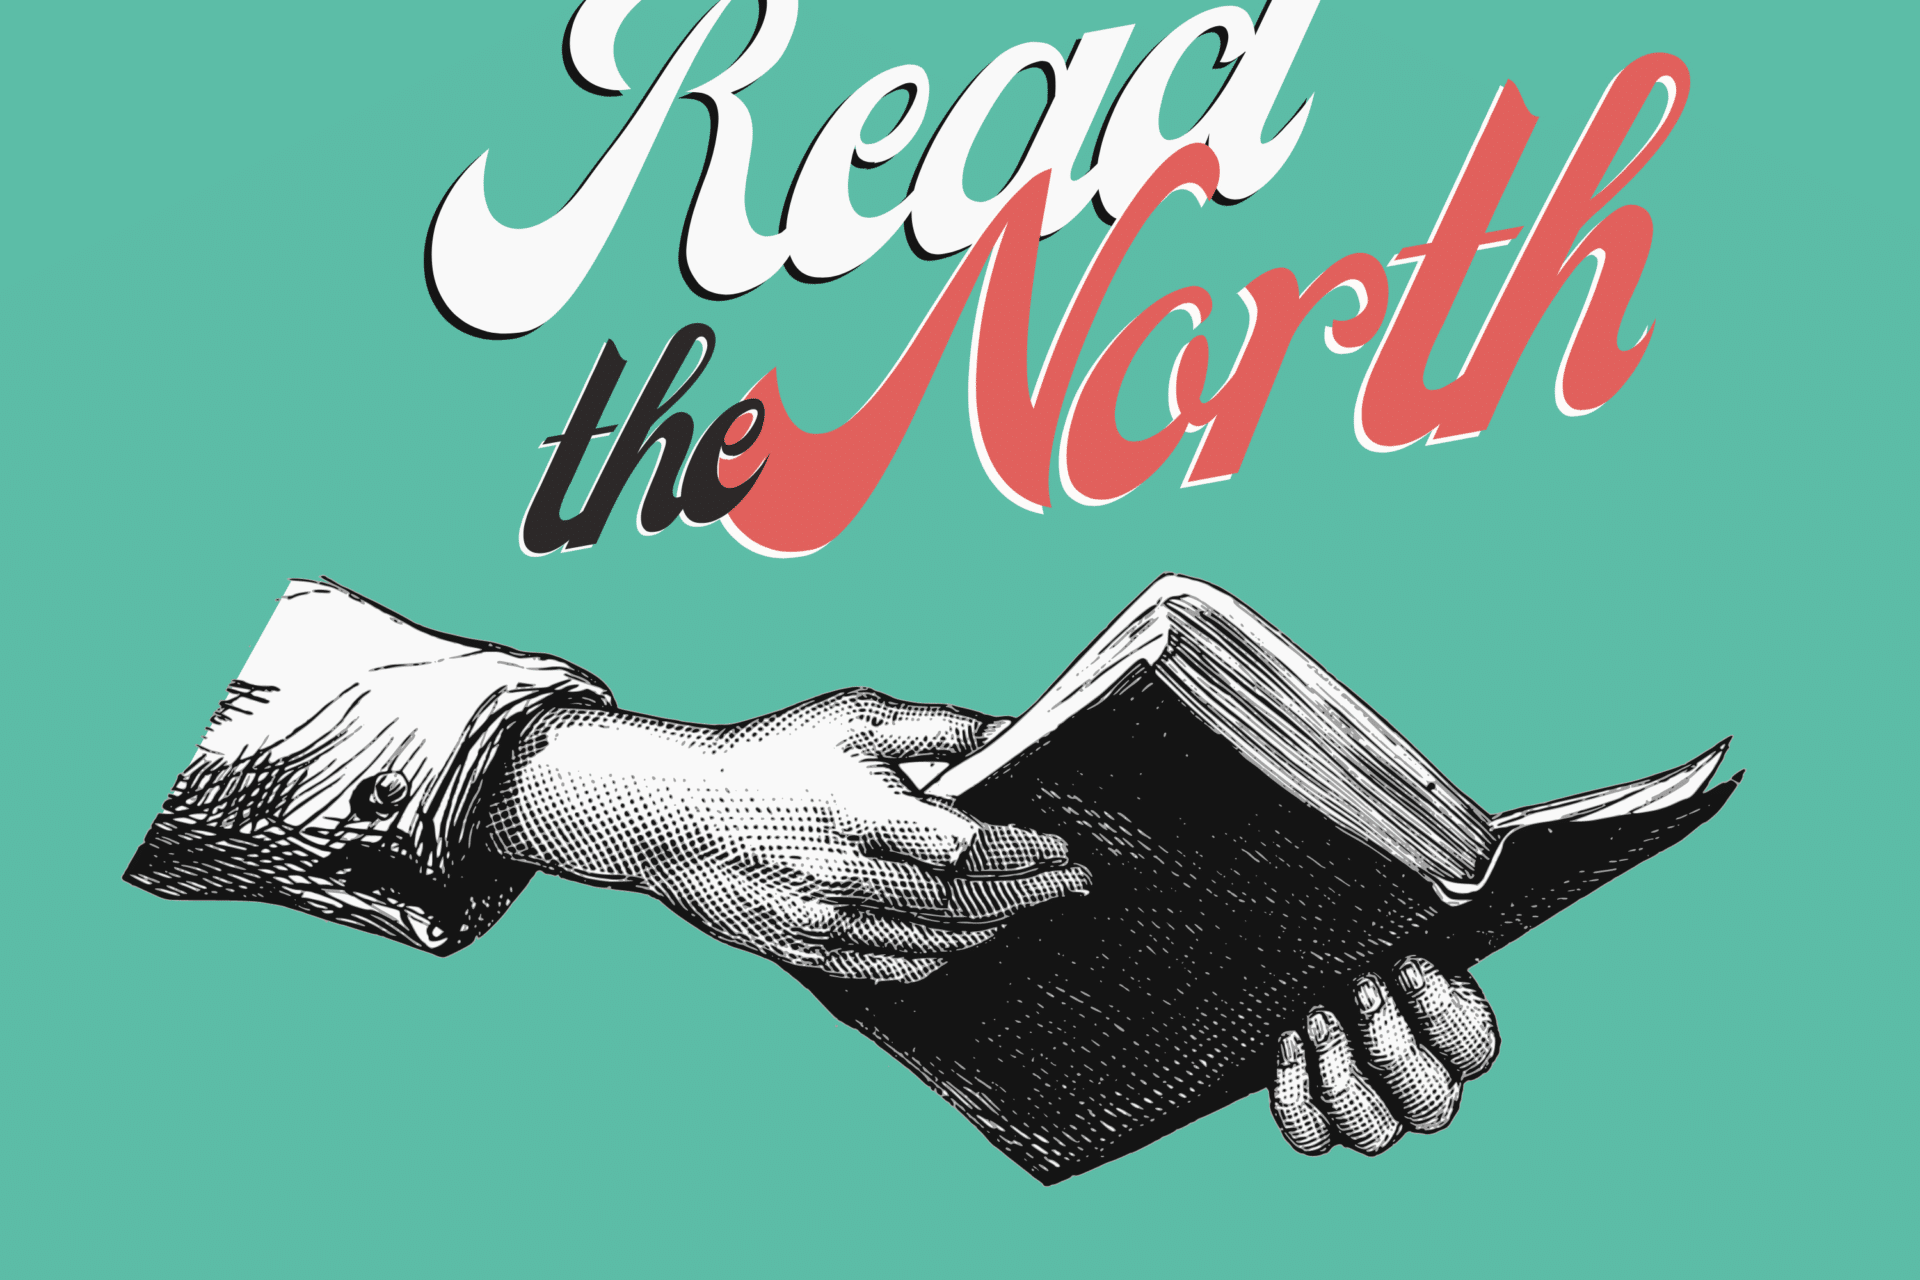 An old-fashioned illustration of hands holding a book underneath the title "Read the North"